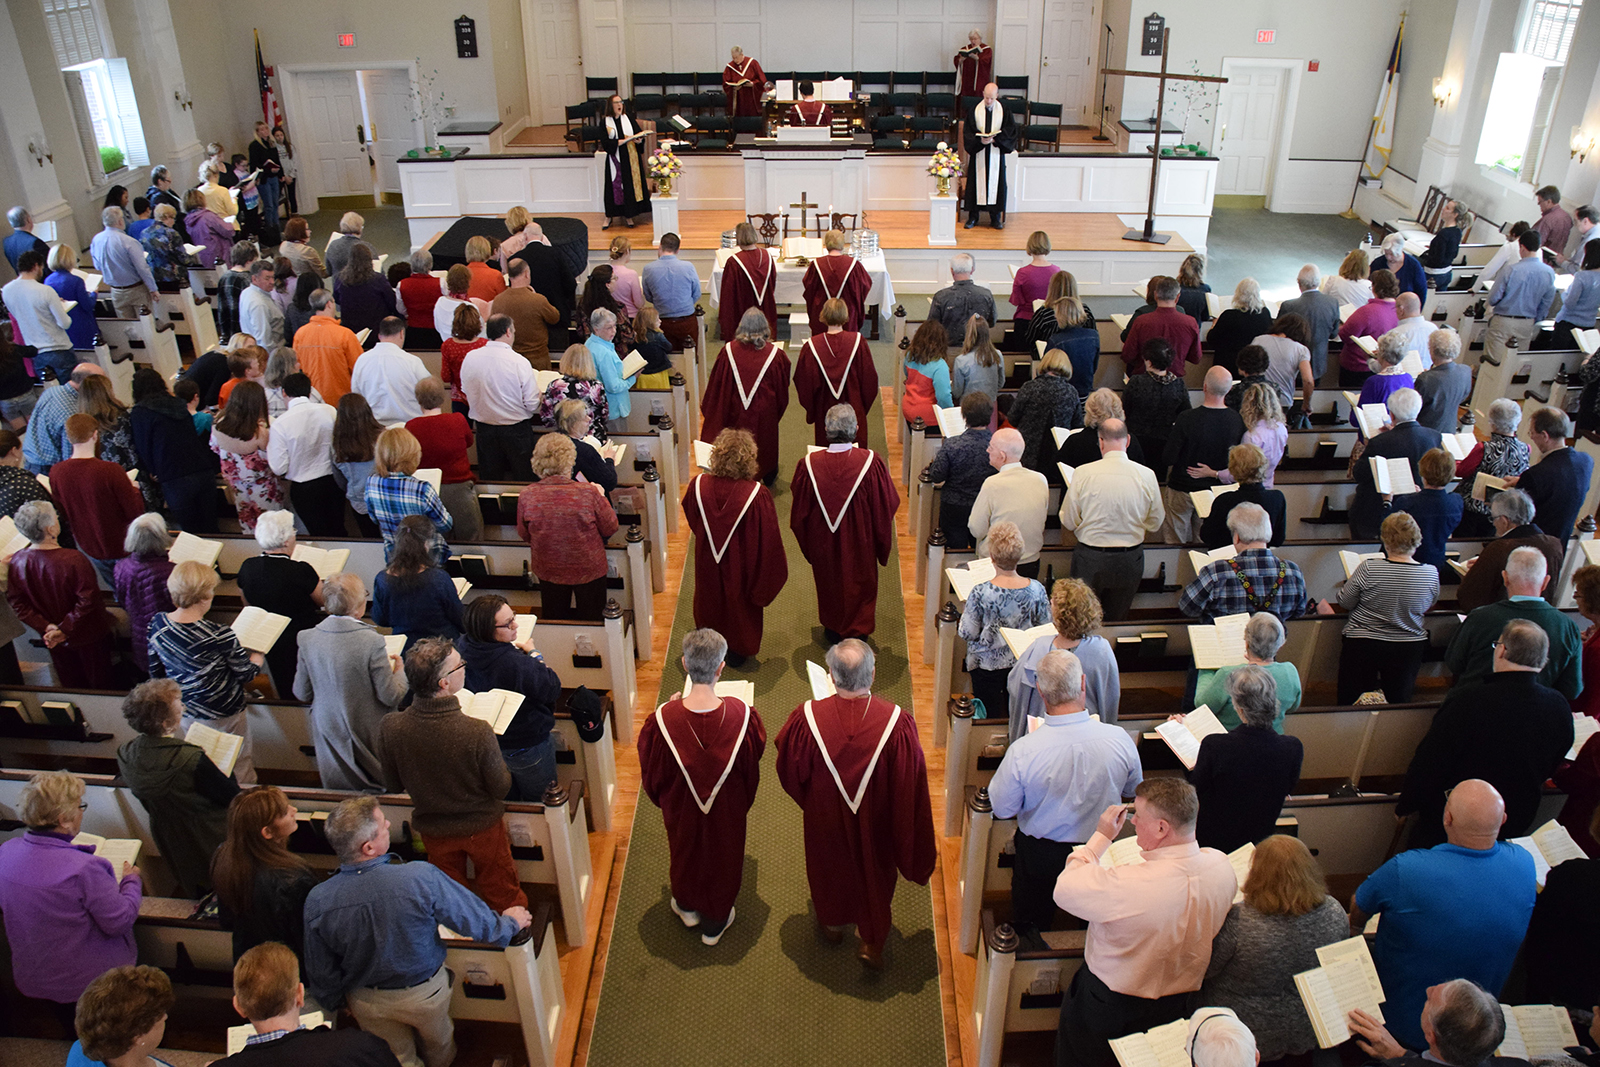 A pre-COVID service with pews filled at Old South Union Church in Weymouth, Massachusetts. Courtesy photo